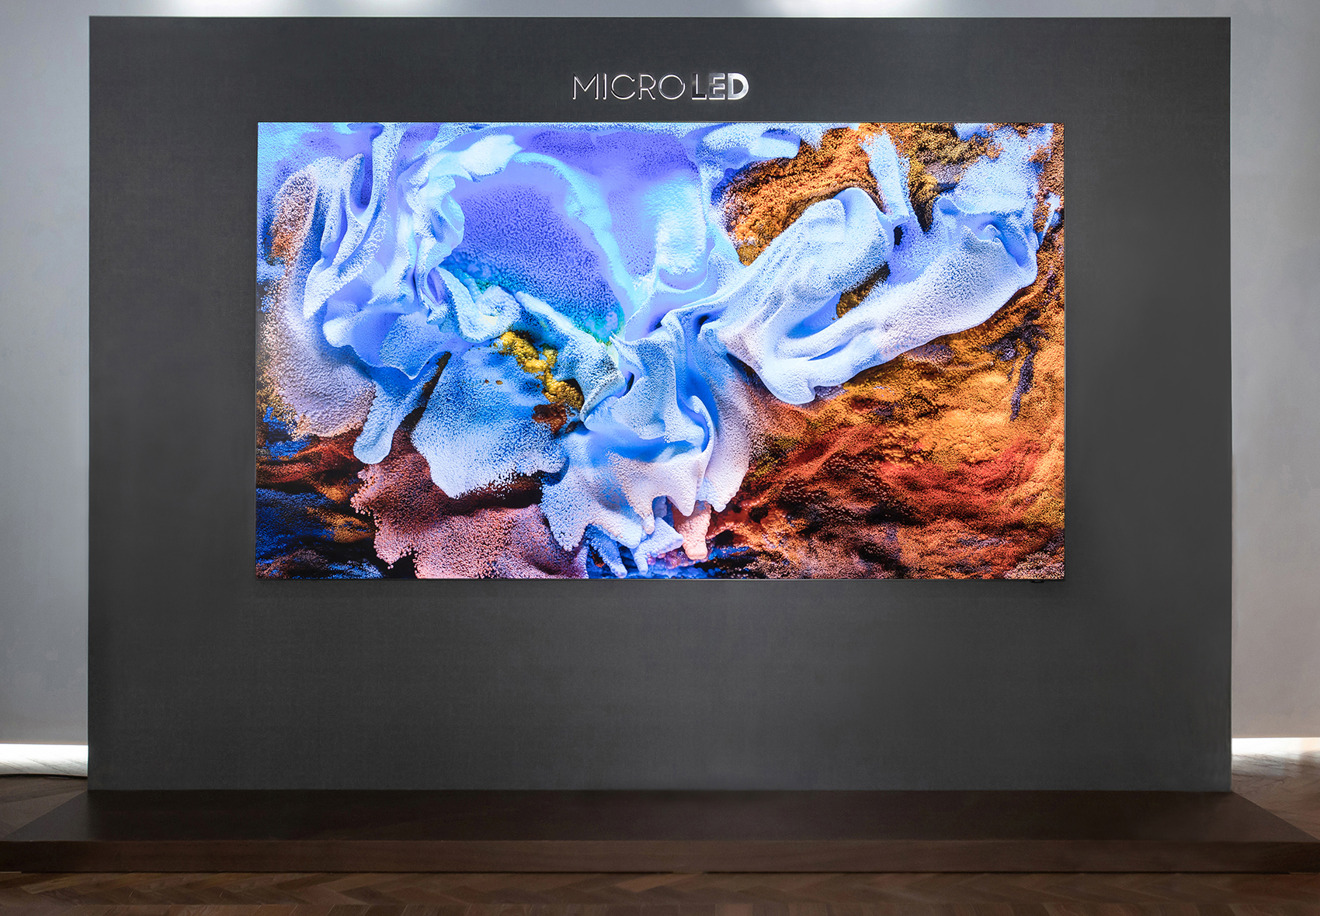 Samsung's 2020 attempt at a microLED television. 